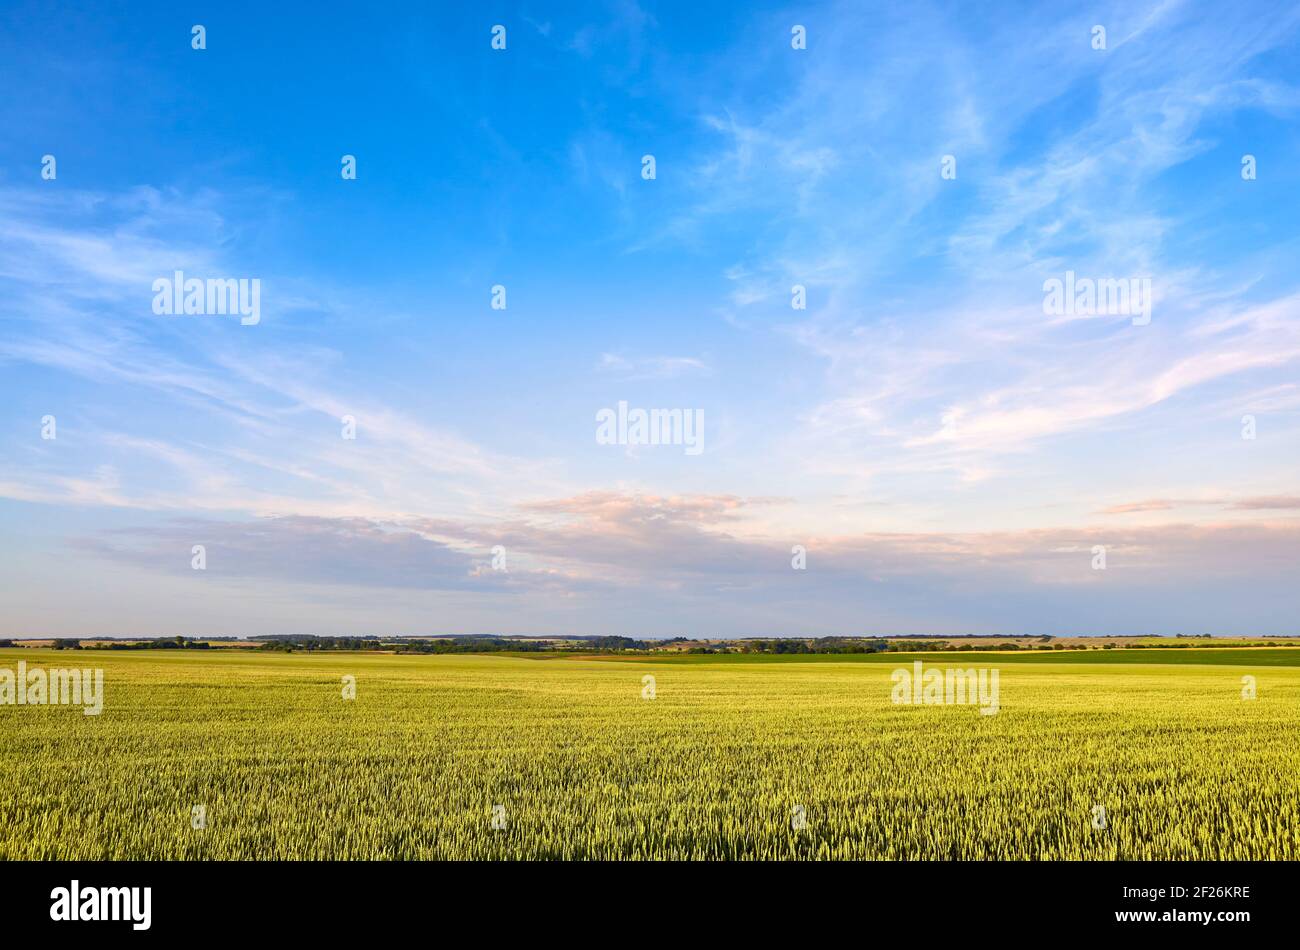 Crop field, rural landscape in the afternoon. Stock Photo